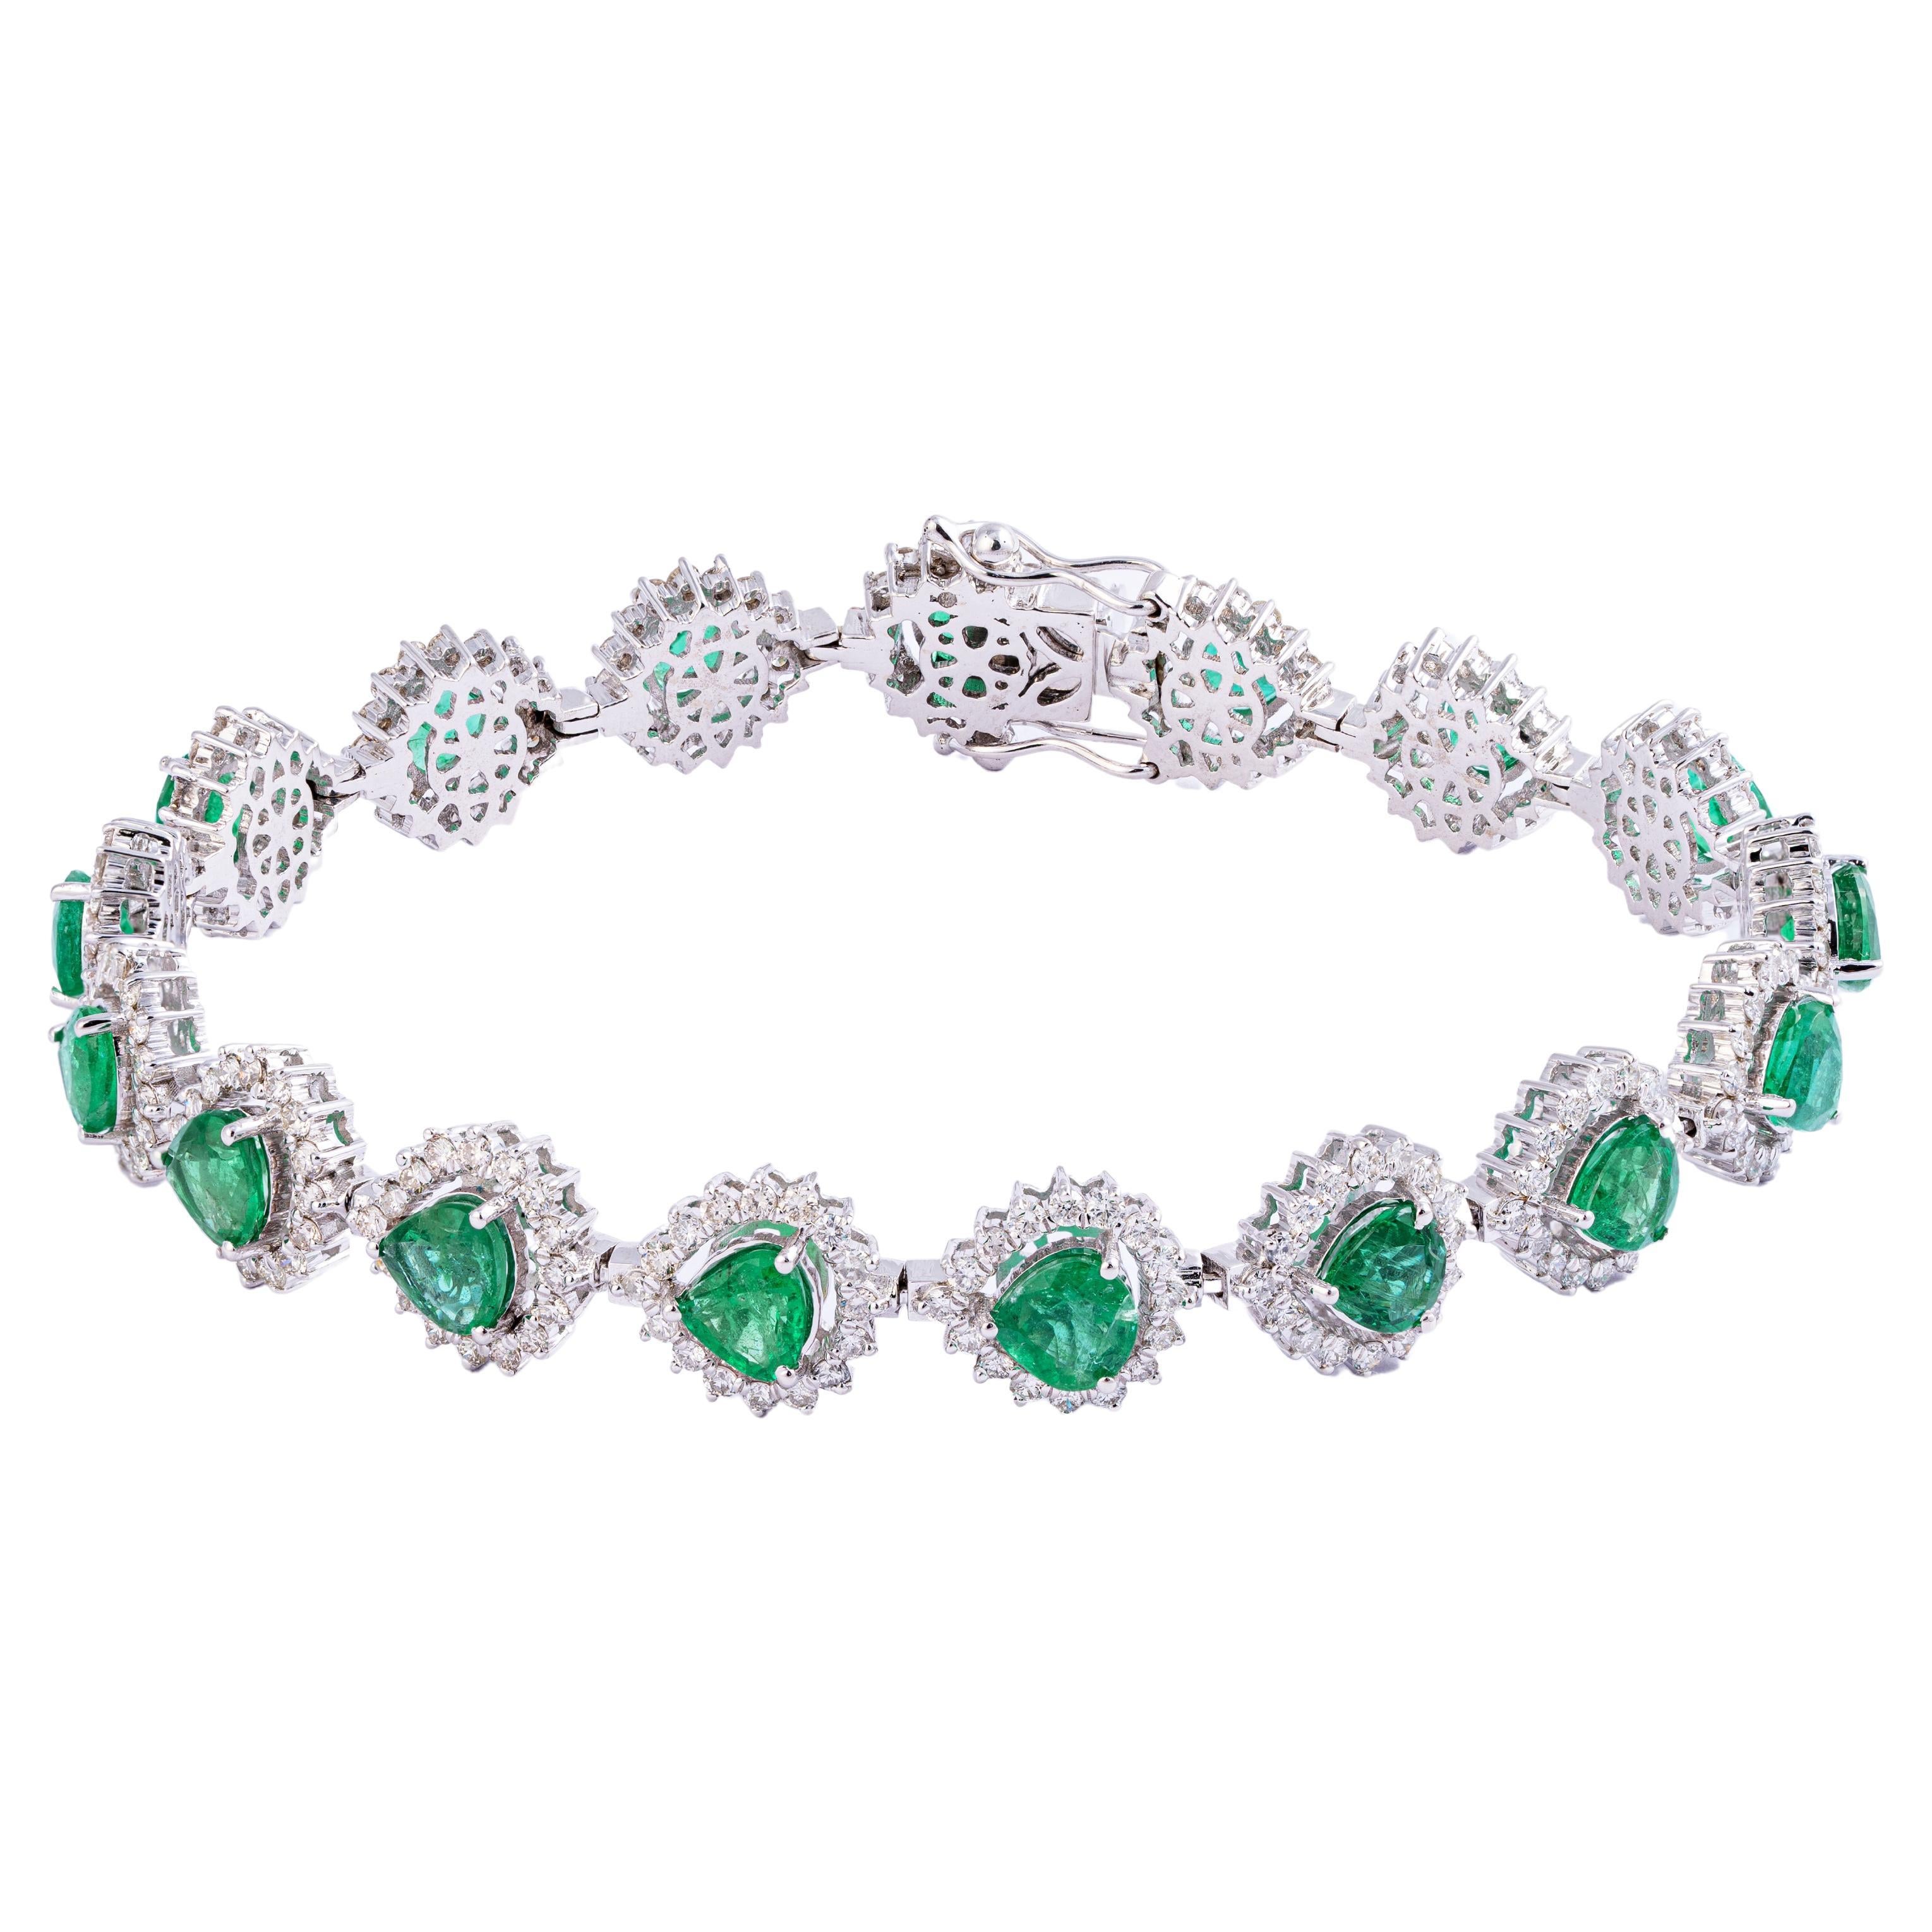 7.42cts  Zambian Emerald Tennis Bracelet with 3.00cts Diamonds and 14k Gold For Sale